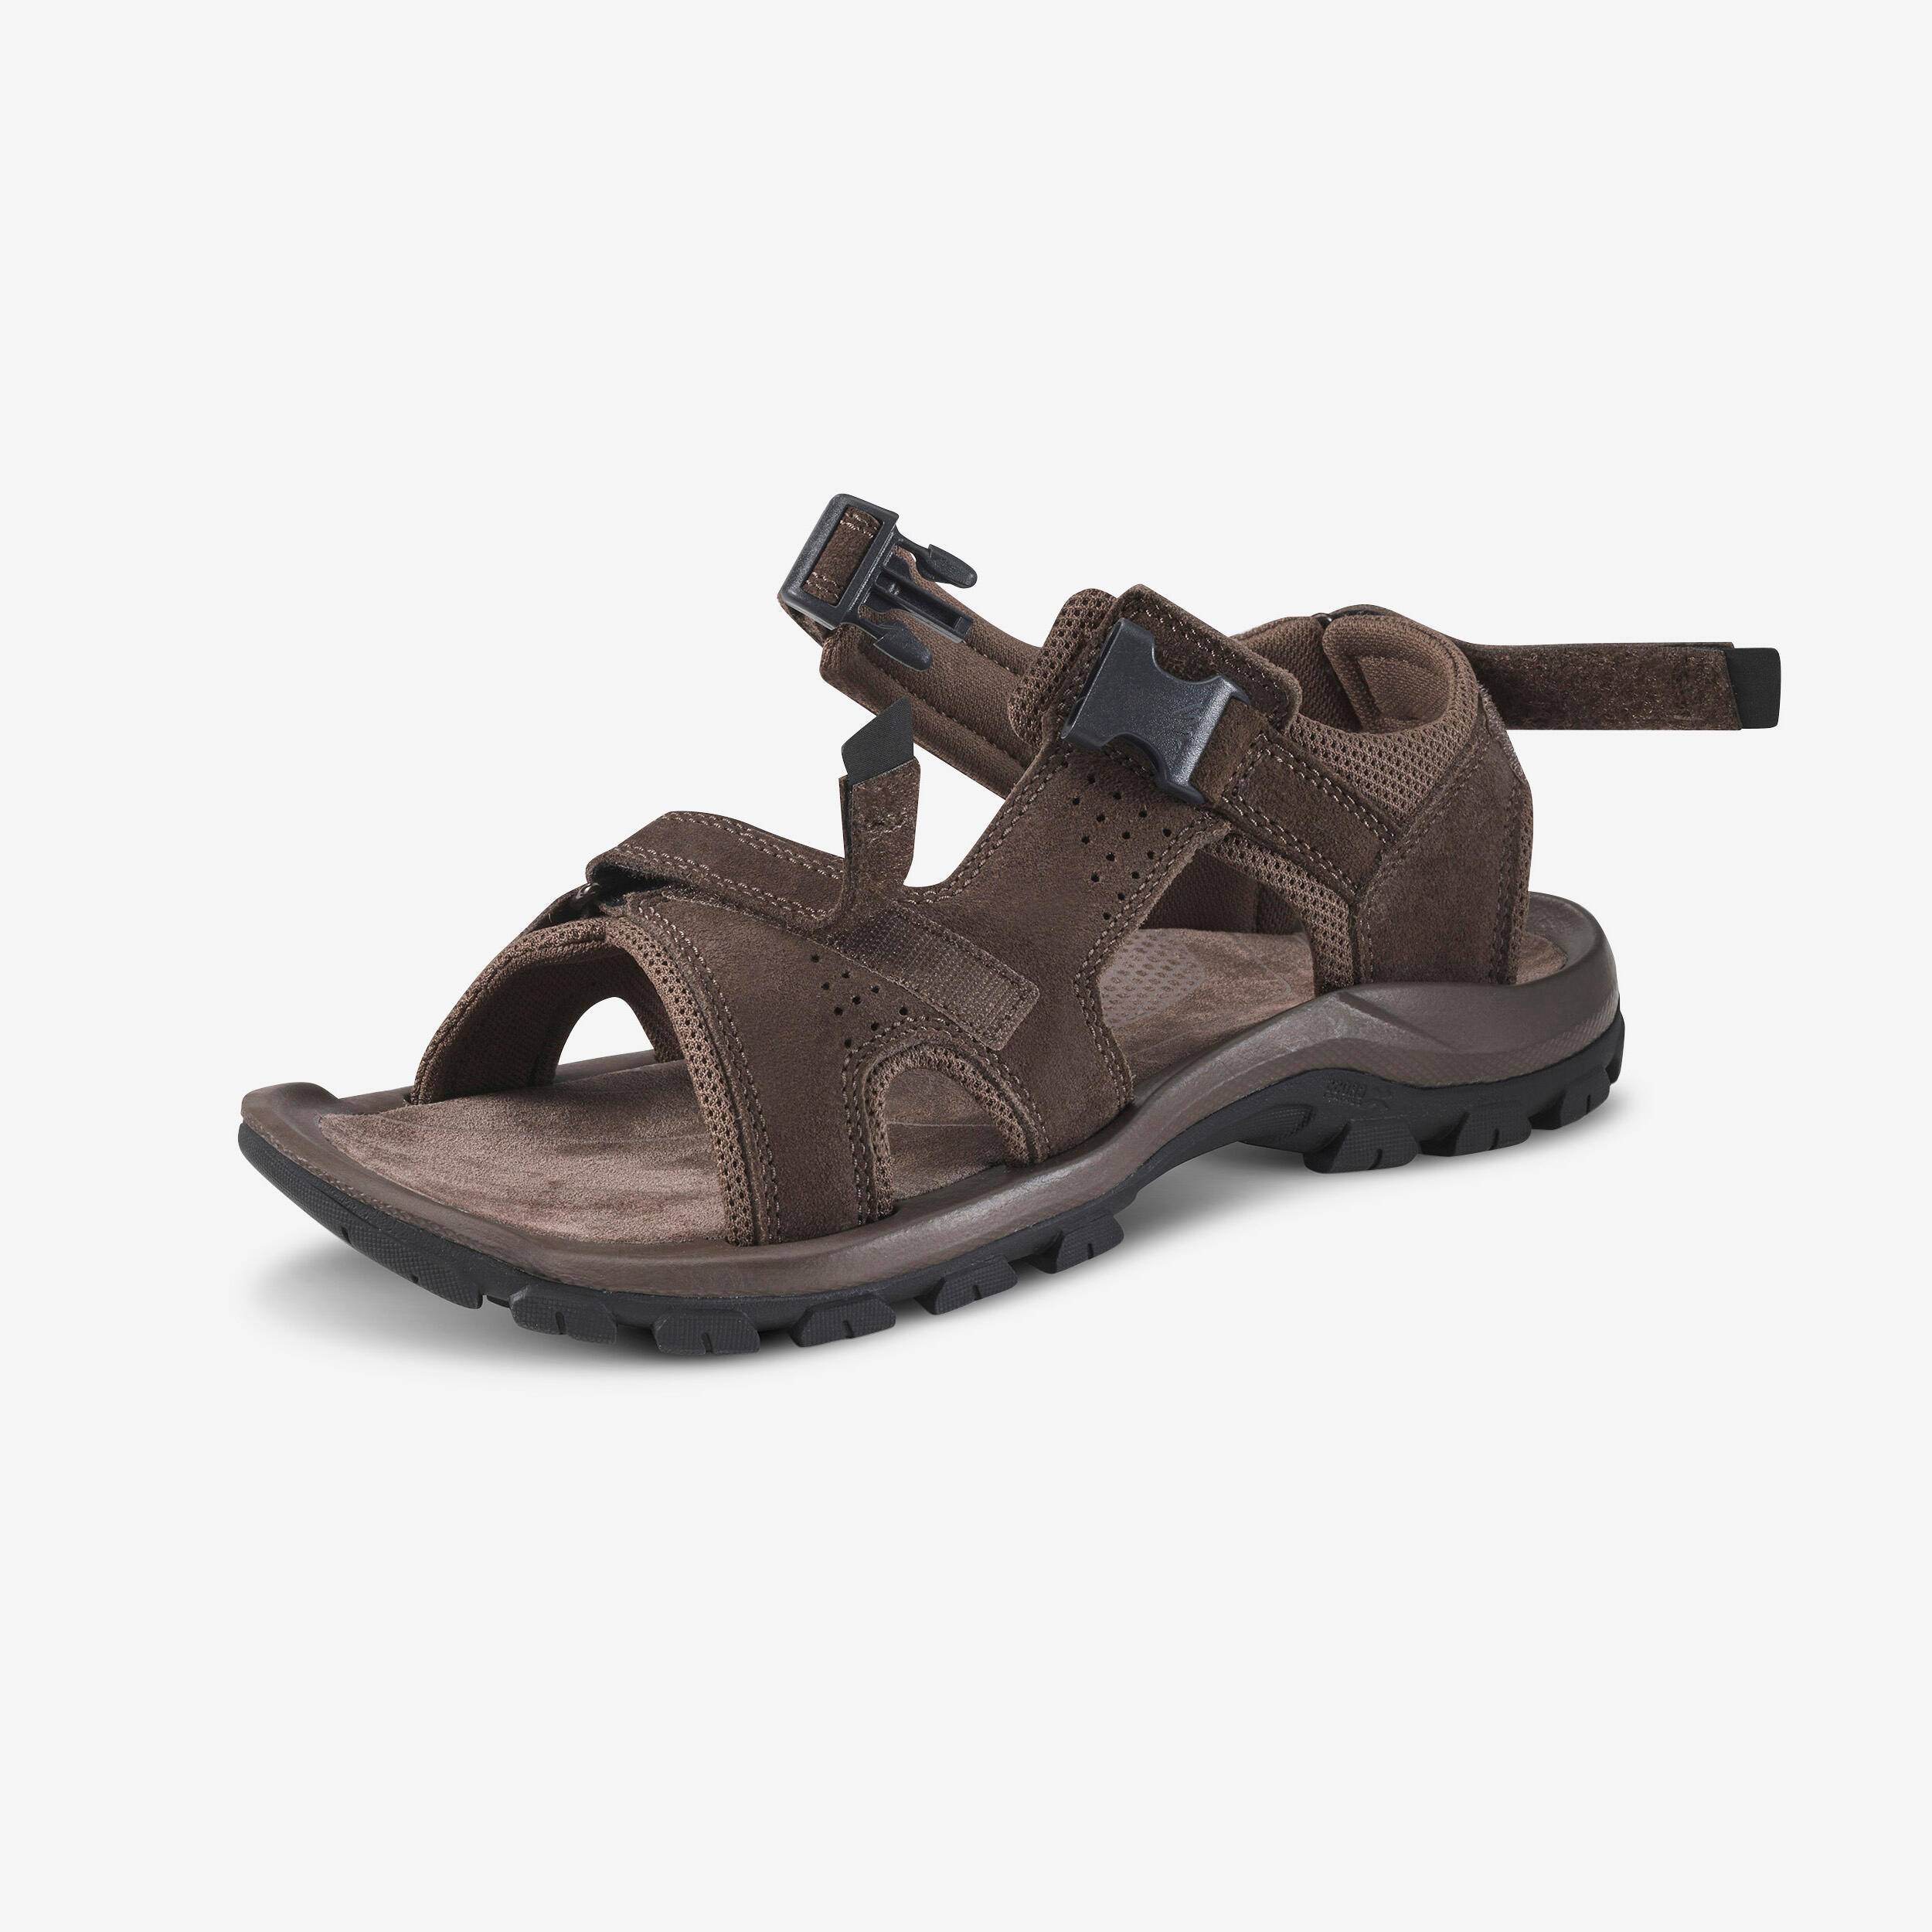 Men's Leather Hiking Sandals NH500 1/7